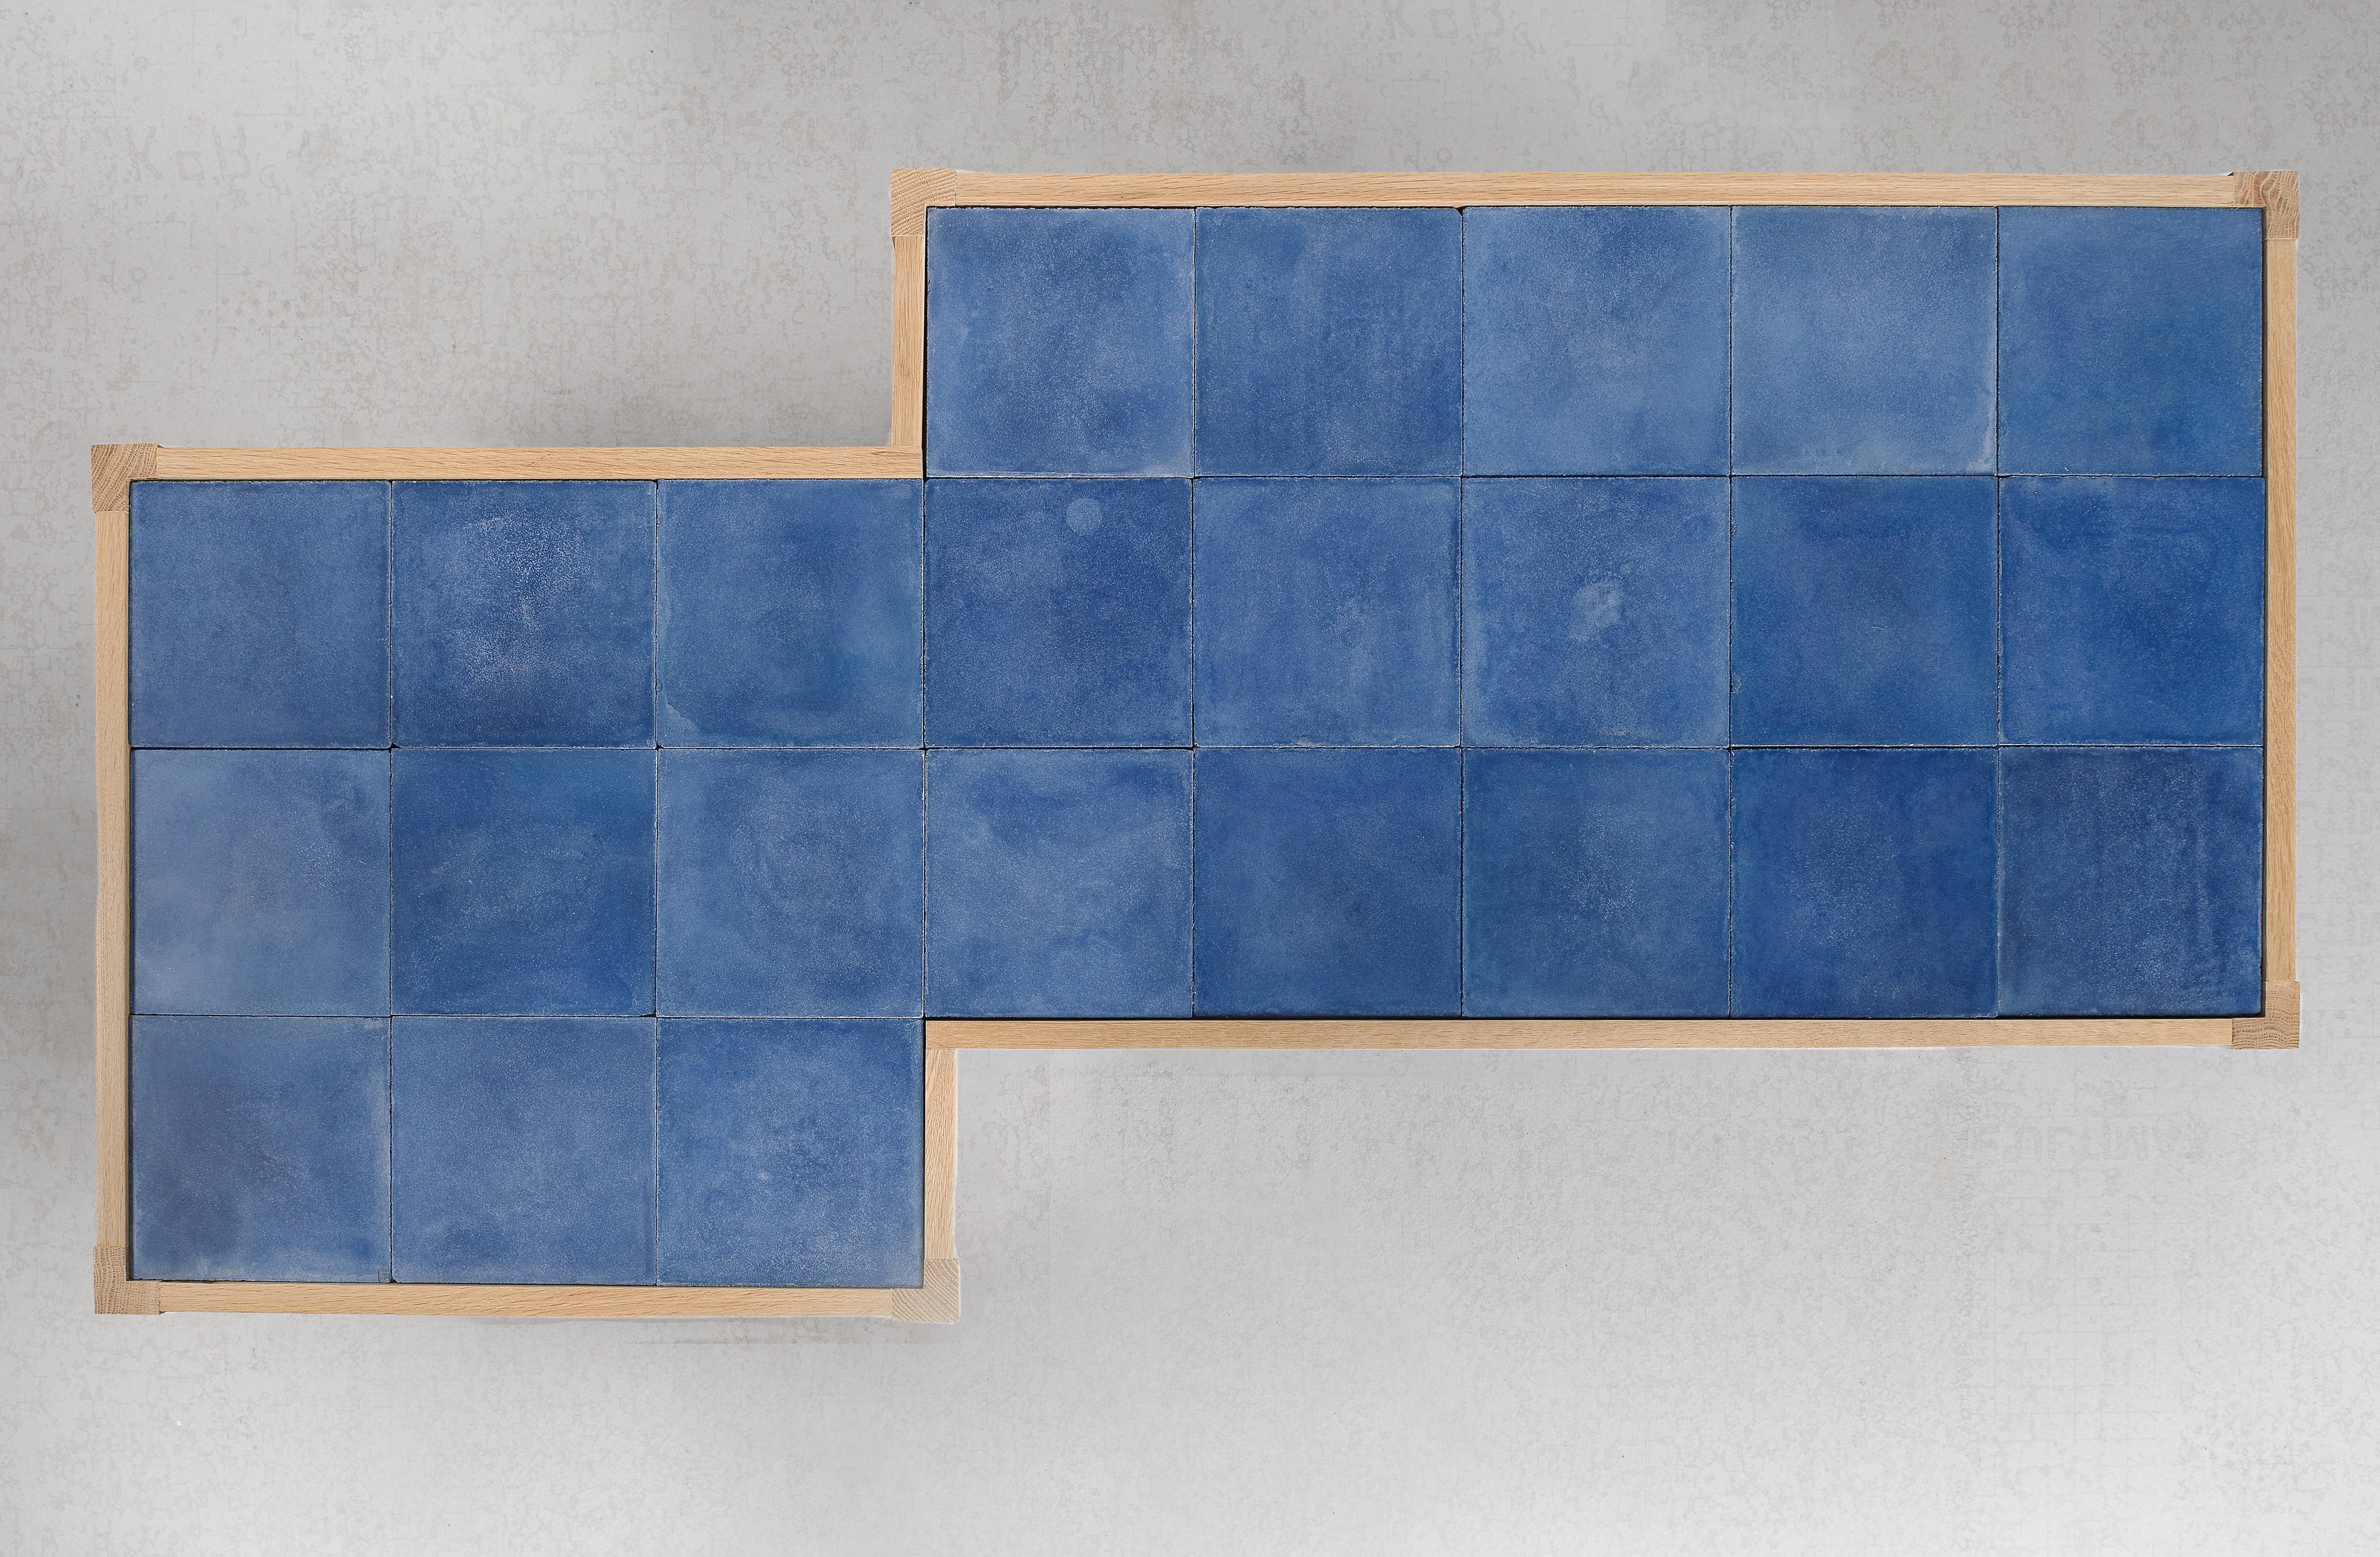 American Warm Contemporary Low Table in Natural Oak and Blue Tile by Vivian Carbonell For Sale